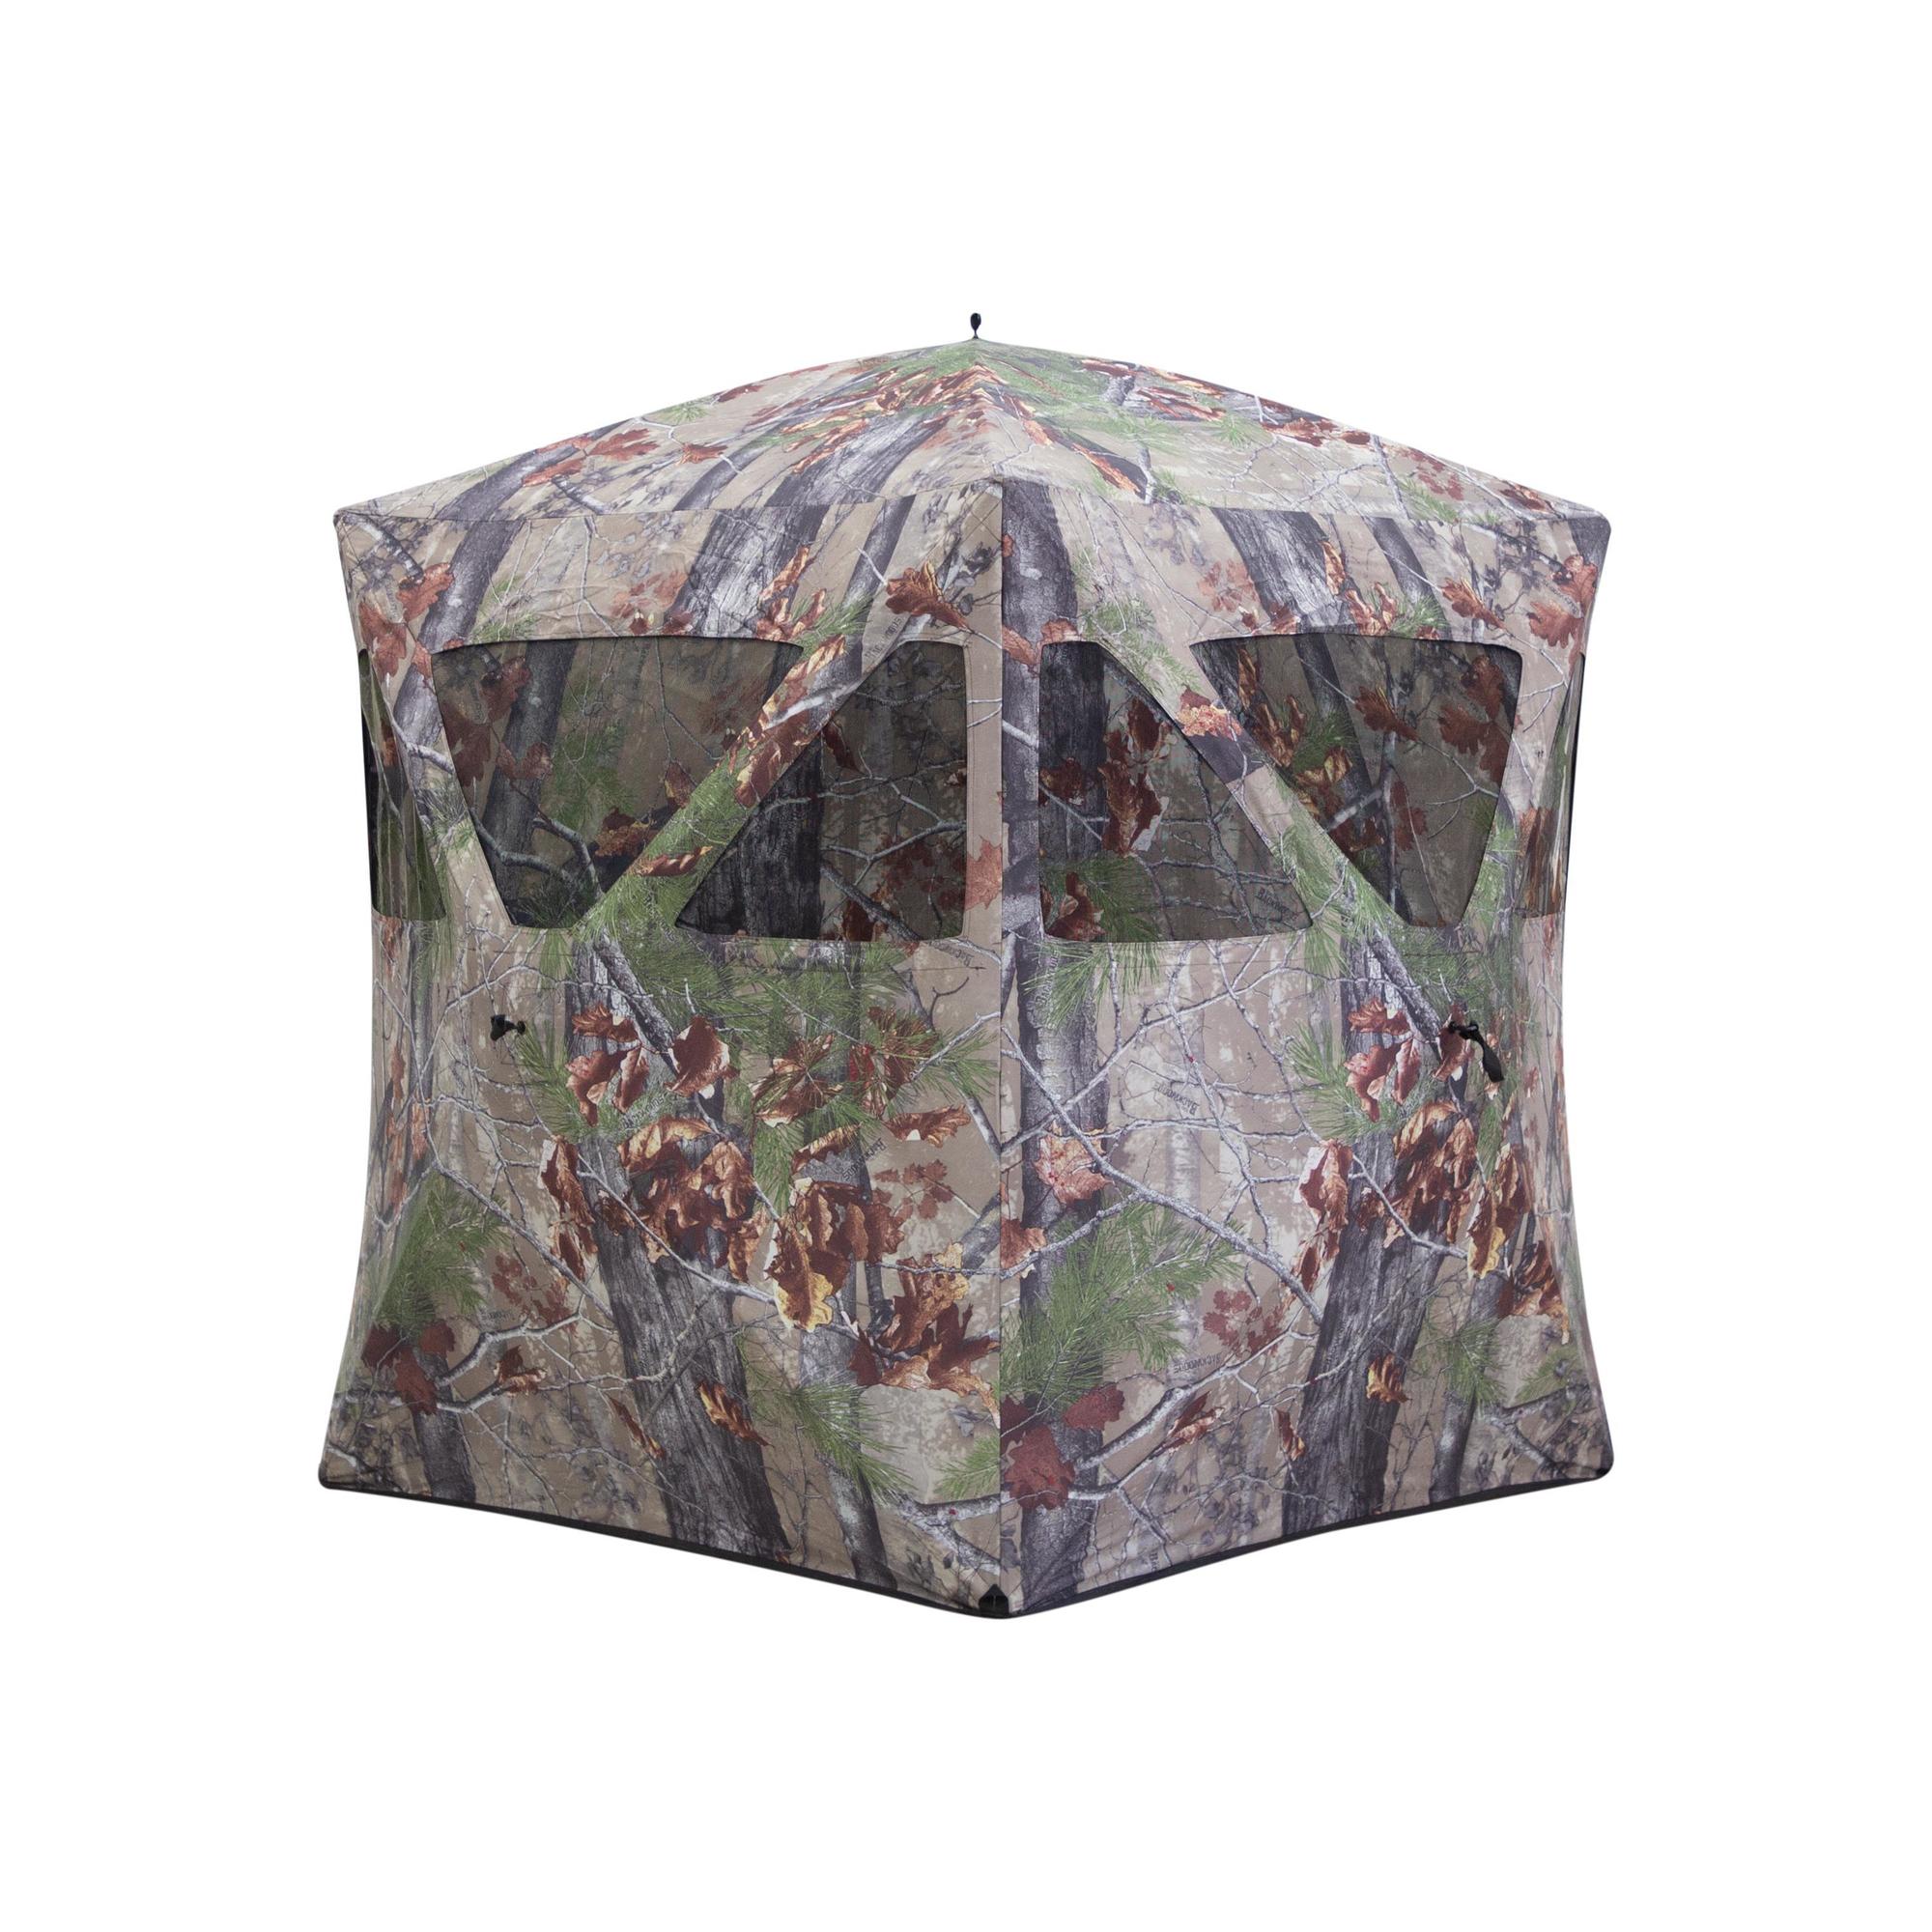 Barronett Blinds, Radar Portable Hunting Blind, 2-Person Capacity, Color Camouflage, Material Polyester, Model RA200BW